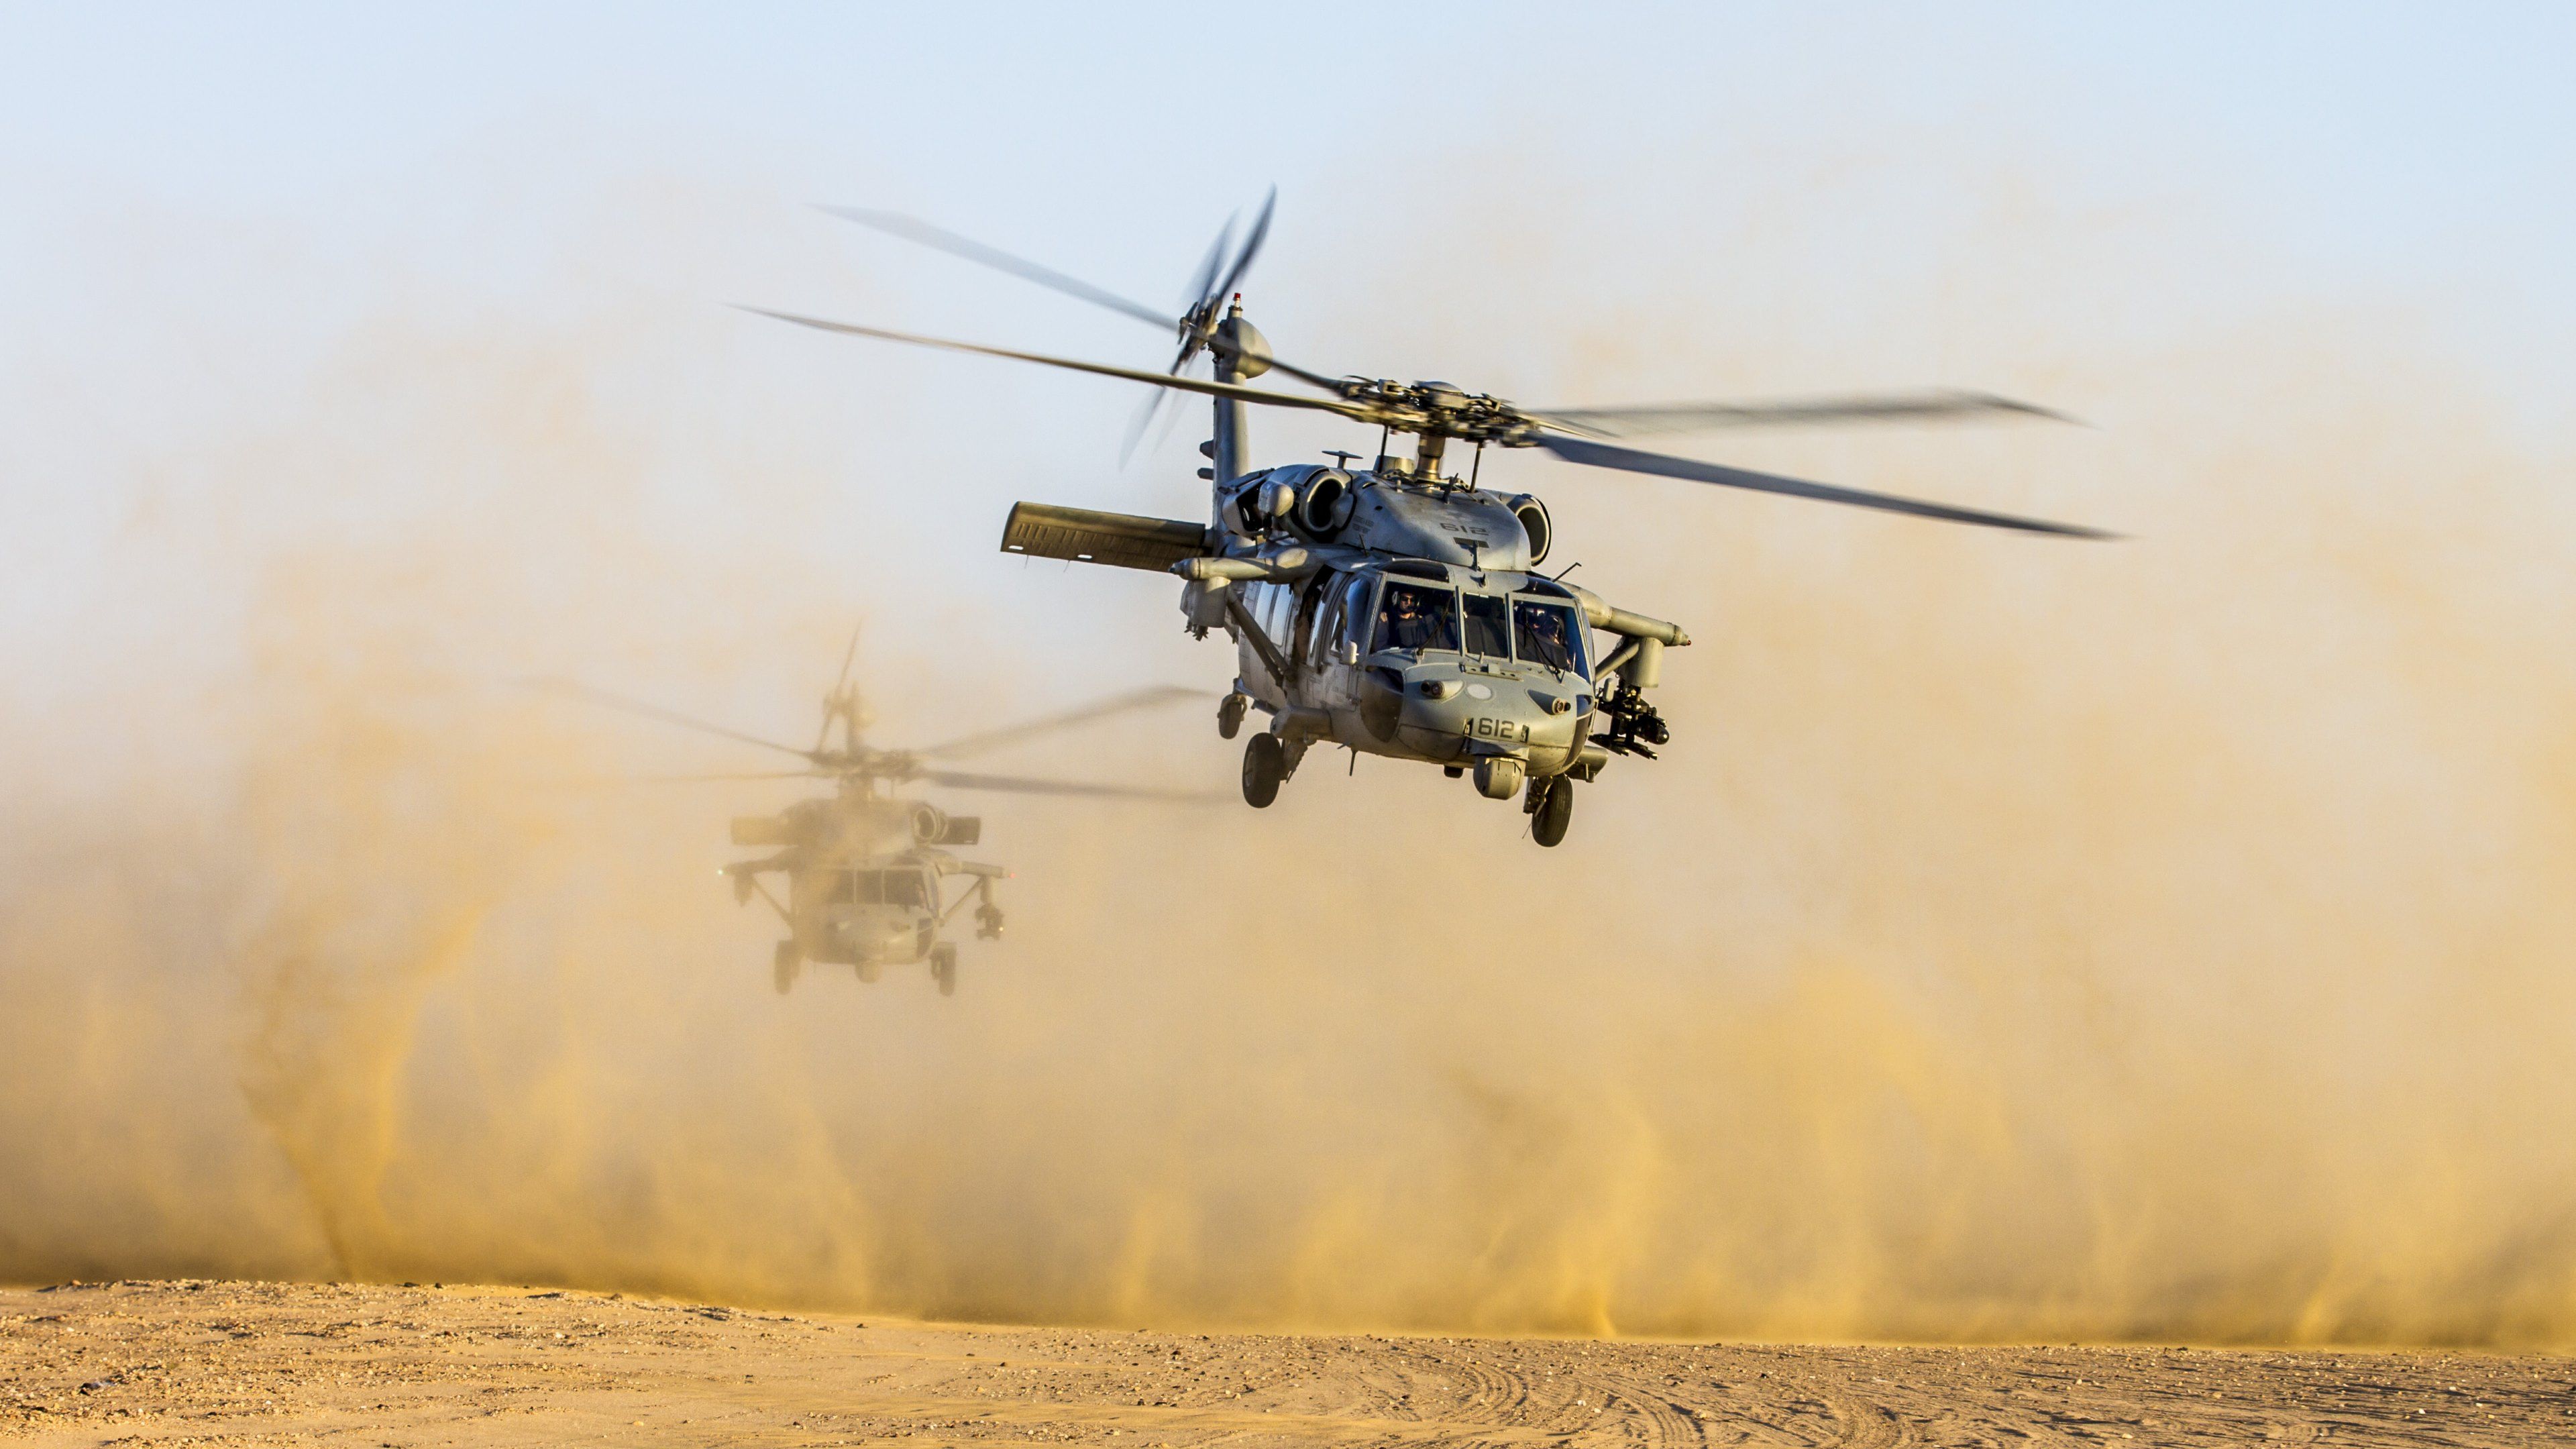 Helicopter Wallpaper Collection For Free Download. Helicopter, Military helicopter, Exercise image